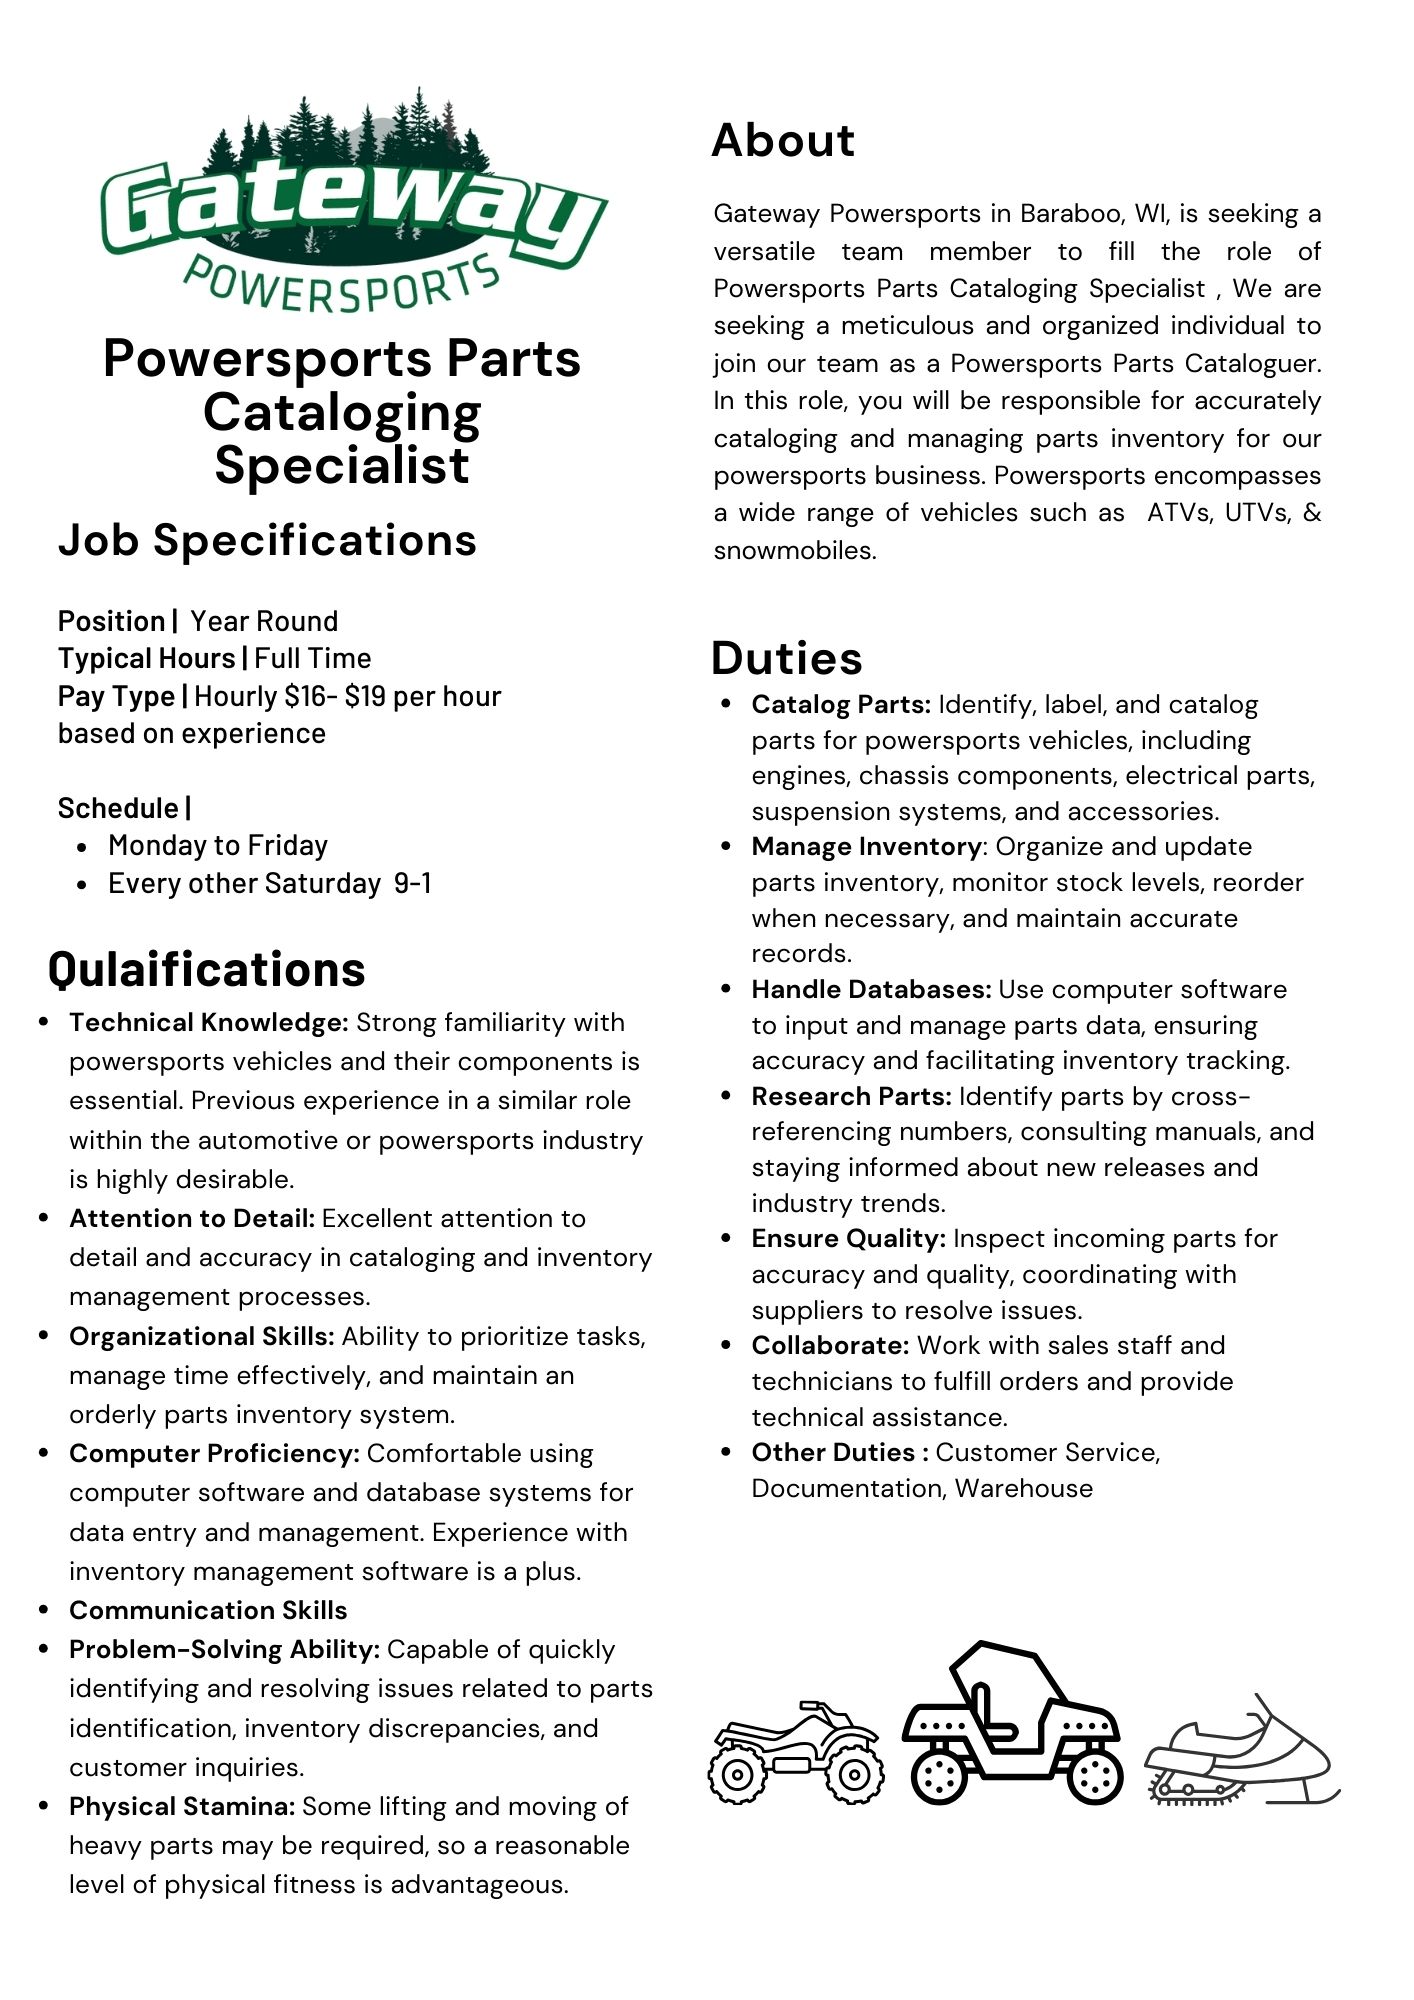 Powersports Cataloging Specialist